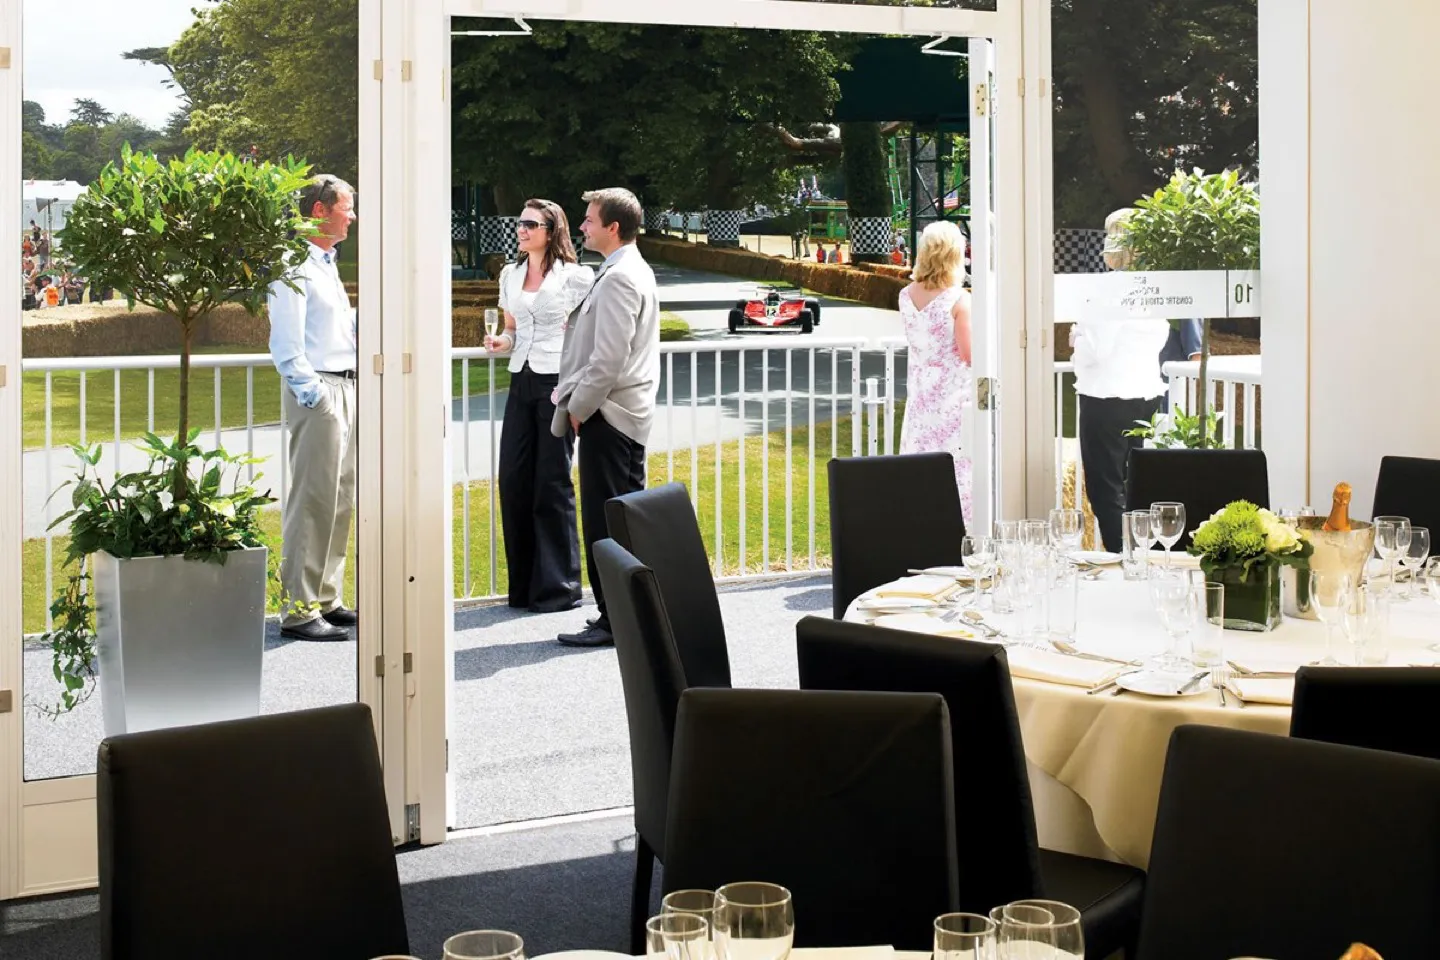 Enjoy champagne and prime views from your corporate hospitality package at Goodwood FoS